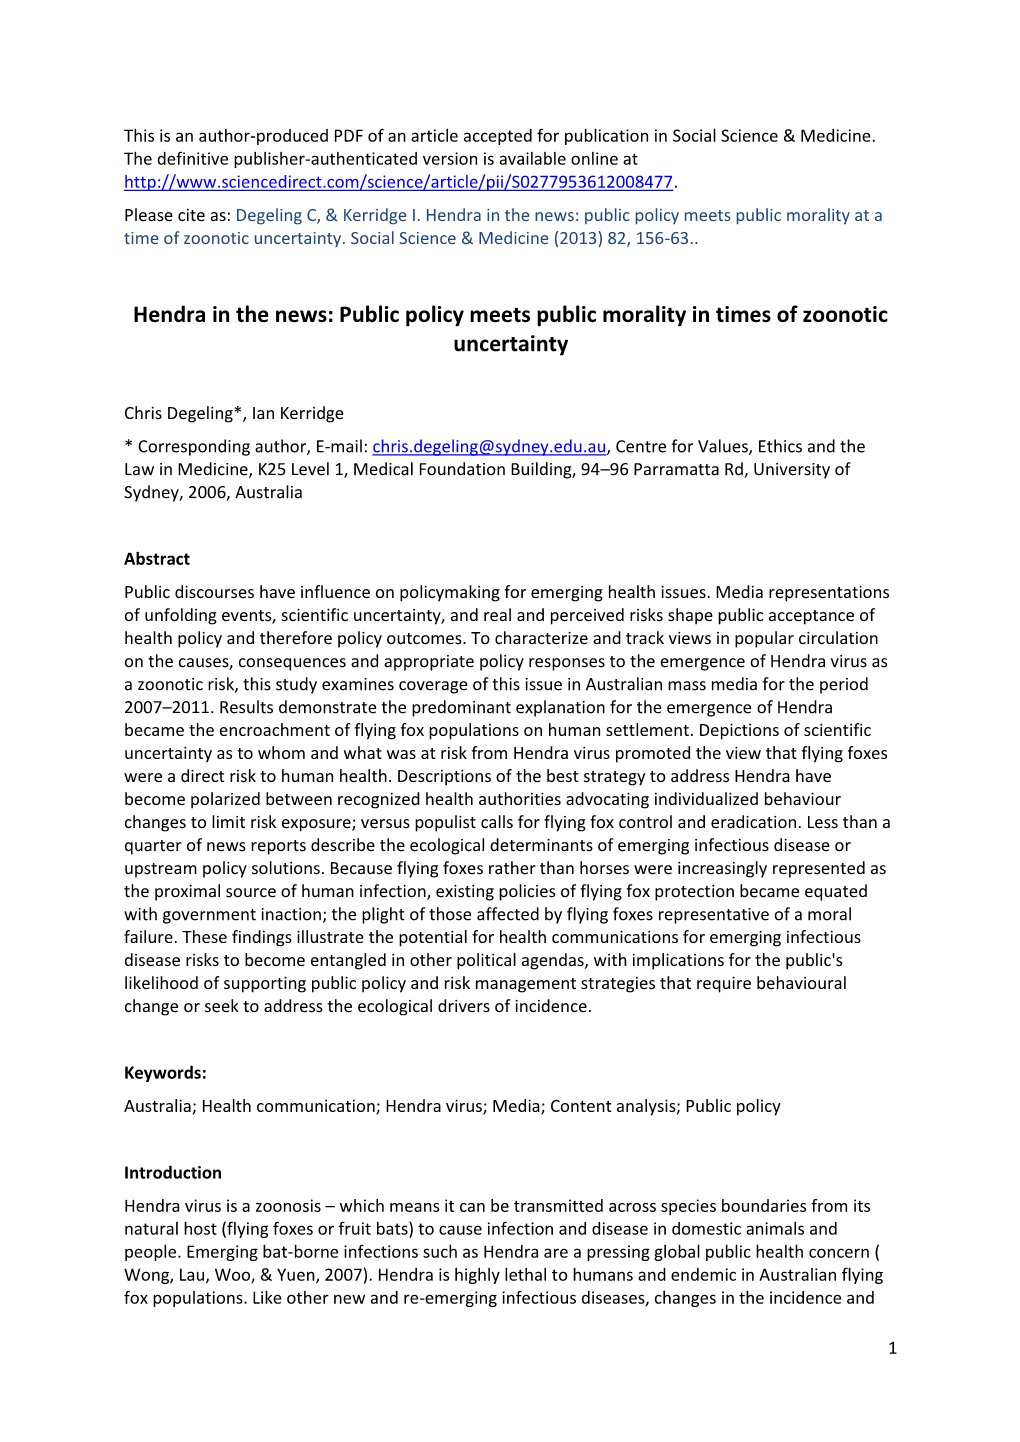 Hendra in the News: Public Policy Meets Public Morality at a Time of Zoonotic Uncertainty